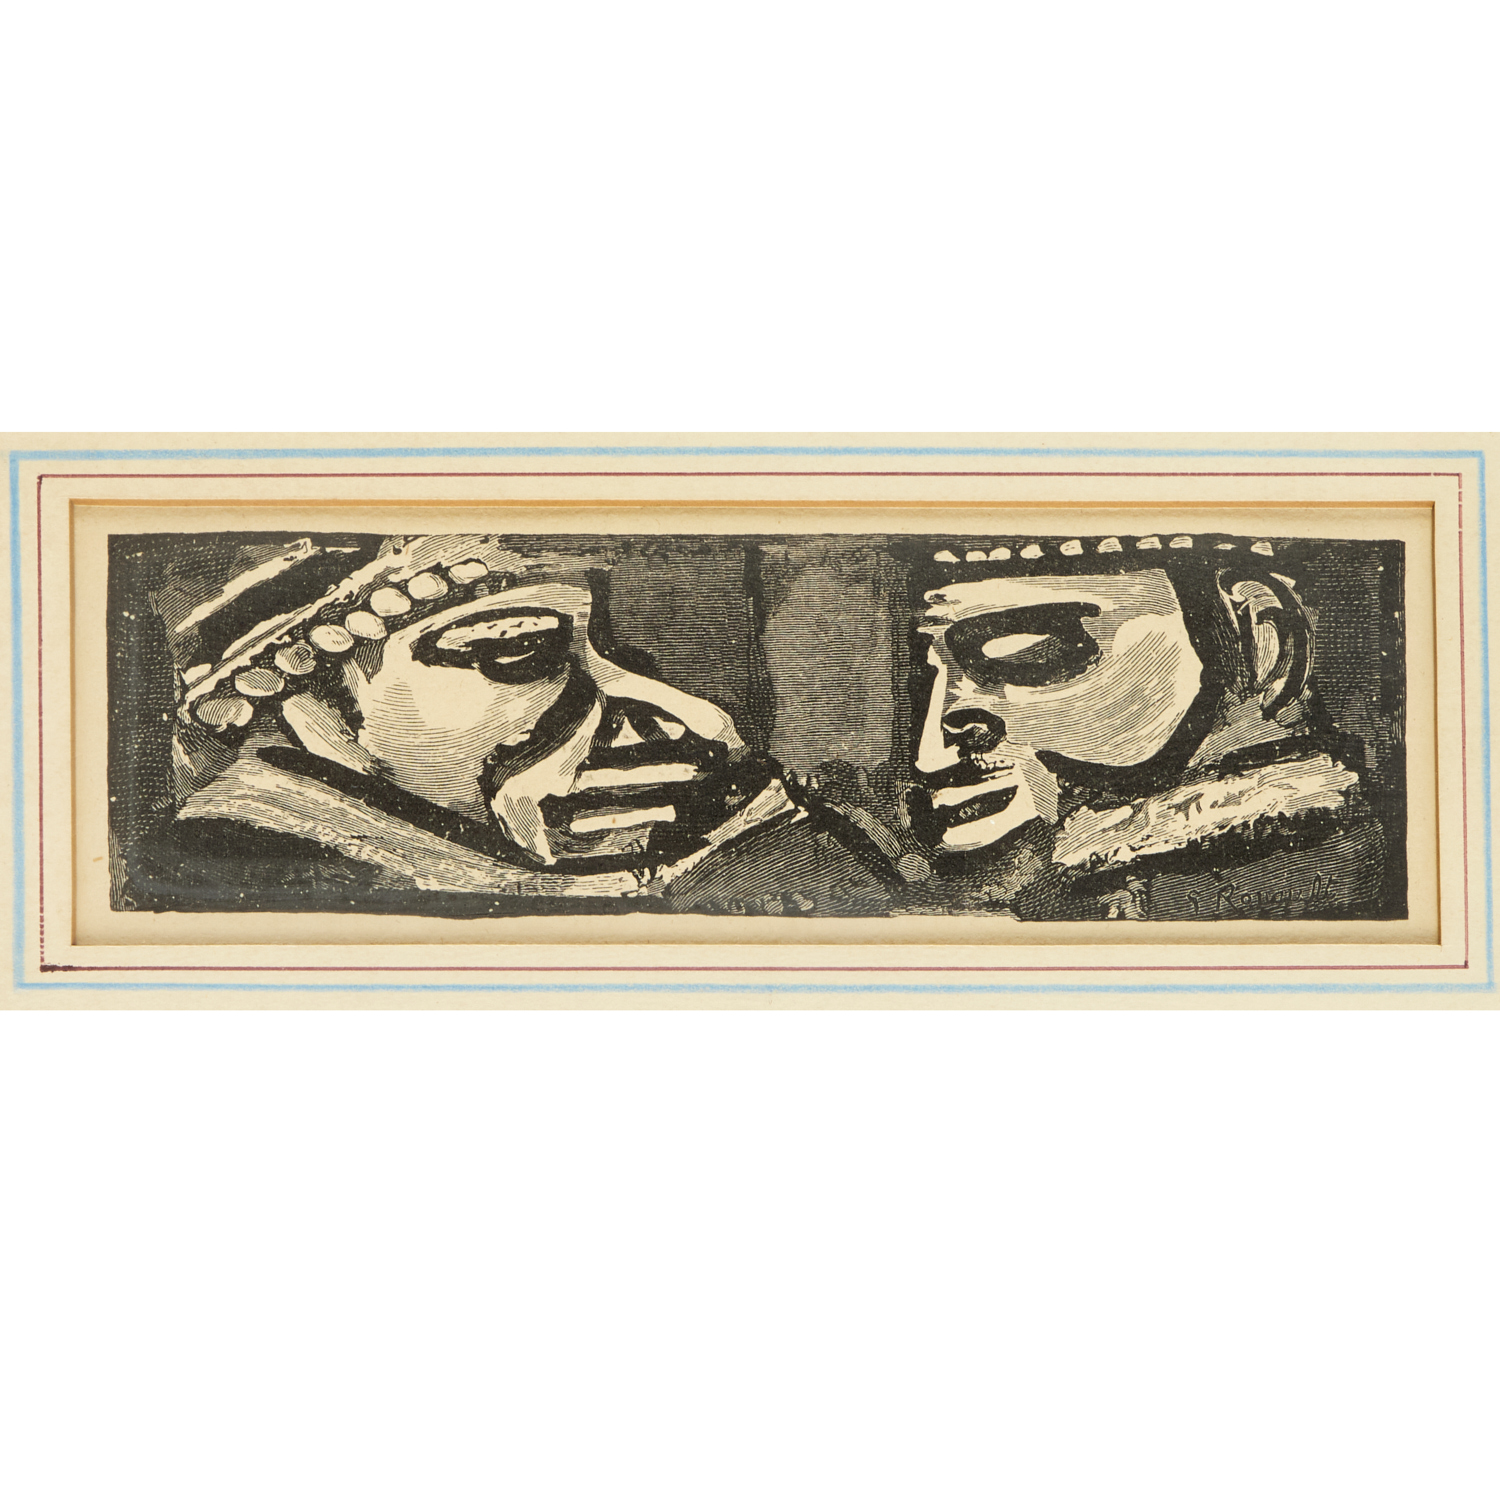 GEORGES ROUAULT WOODCUT ENGRAVING 3613dd